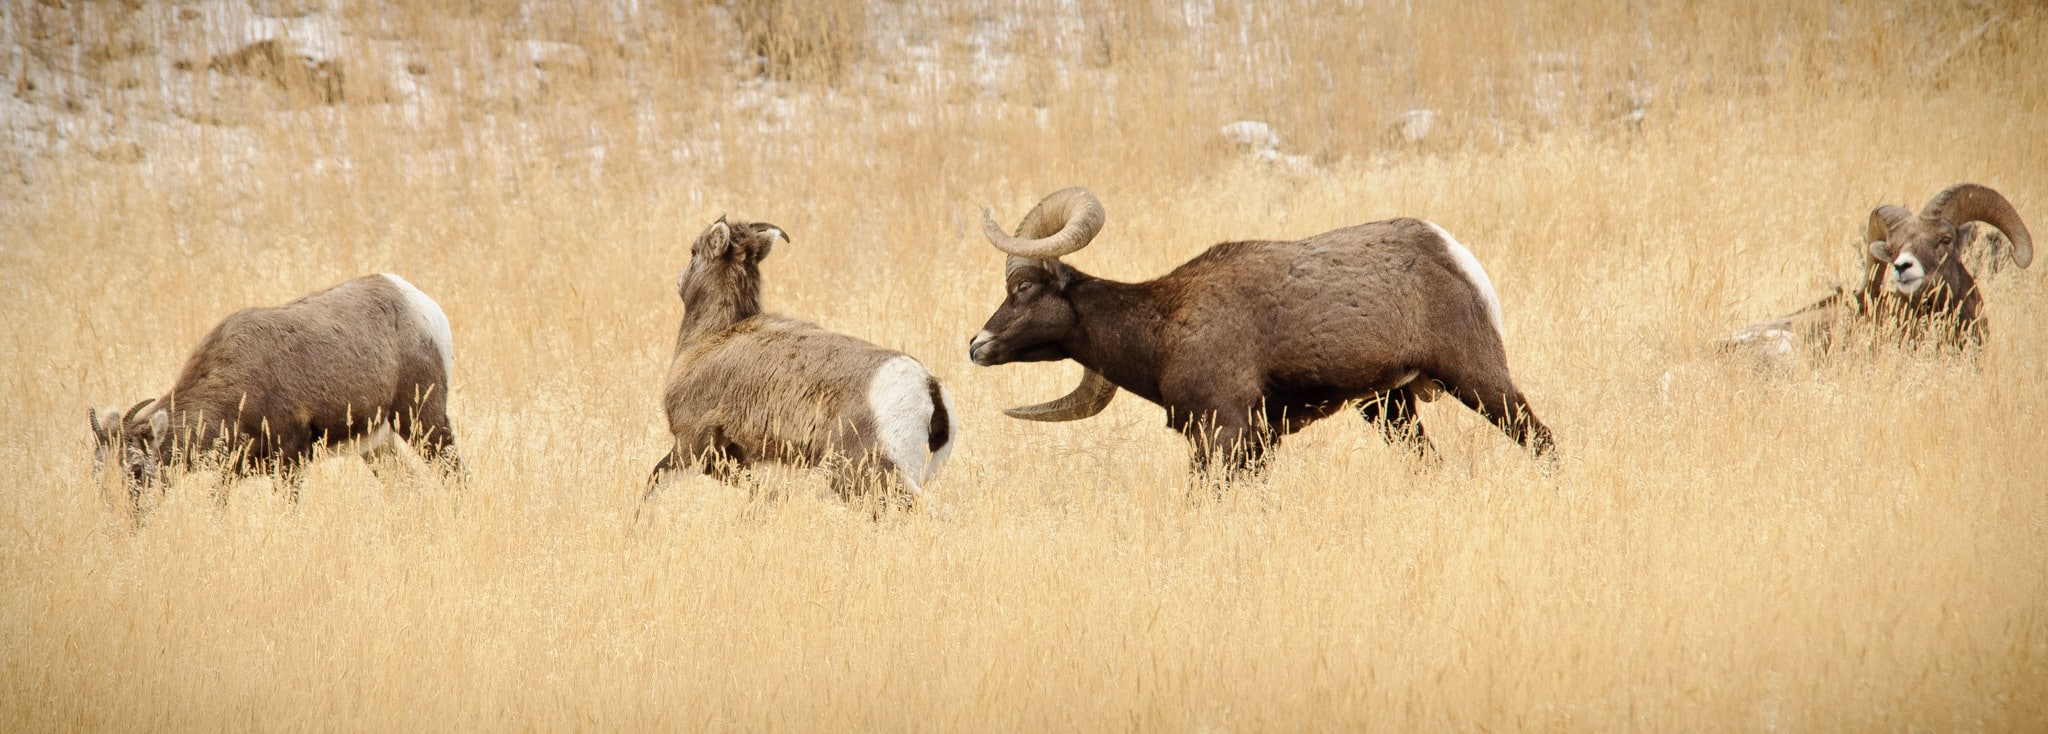 A Bighorn ram pursues the mother of his children-to-be as bystanders eat and rest.